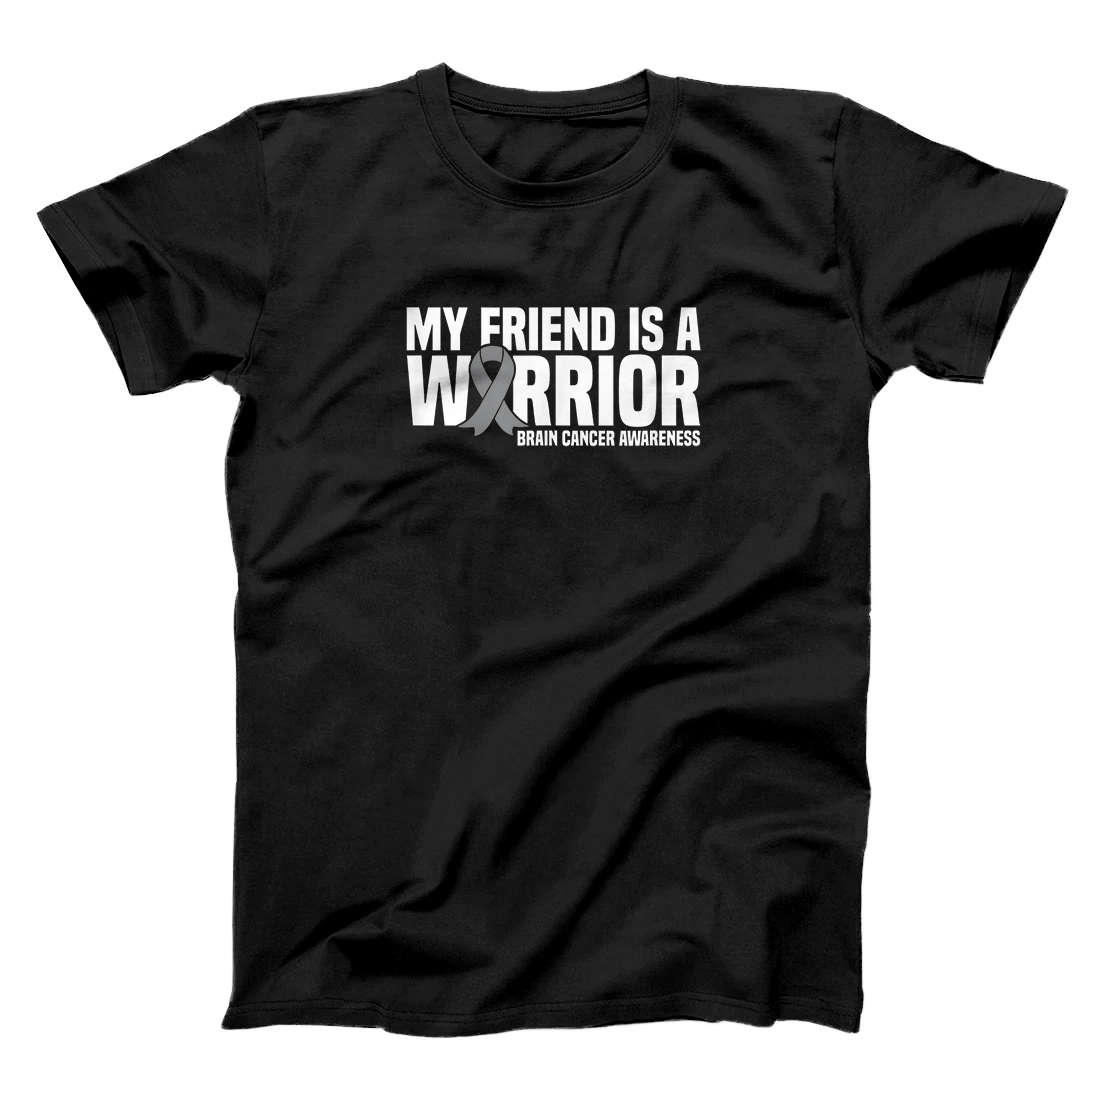 Personalized My Friend is a Warrior Grey Ribbon Brain Cancer Awareness T-Shirt